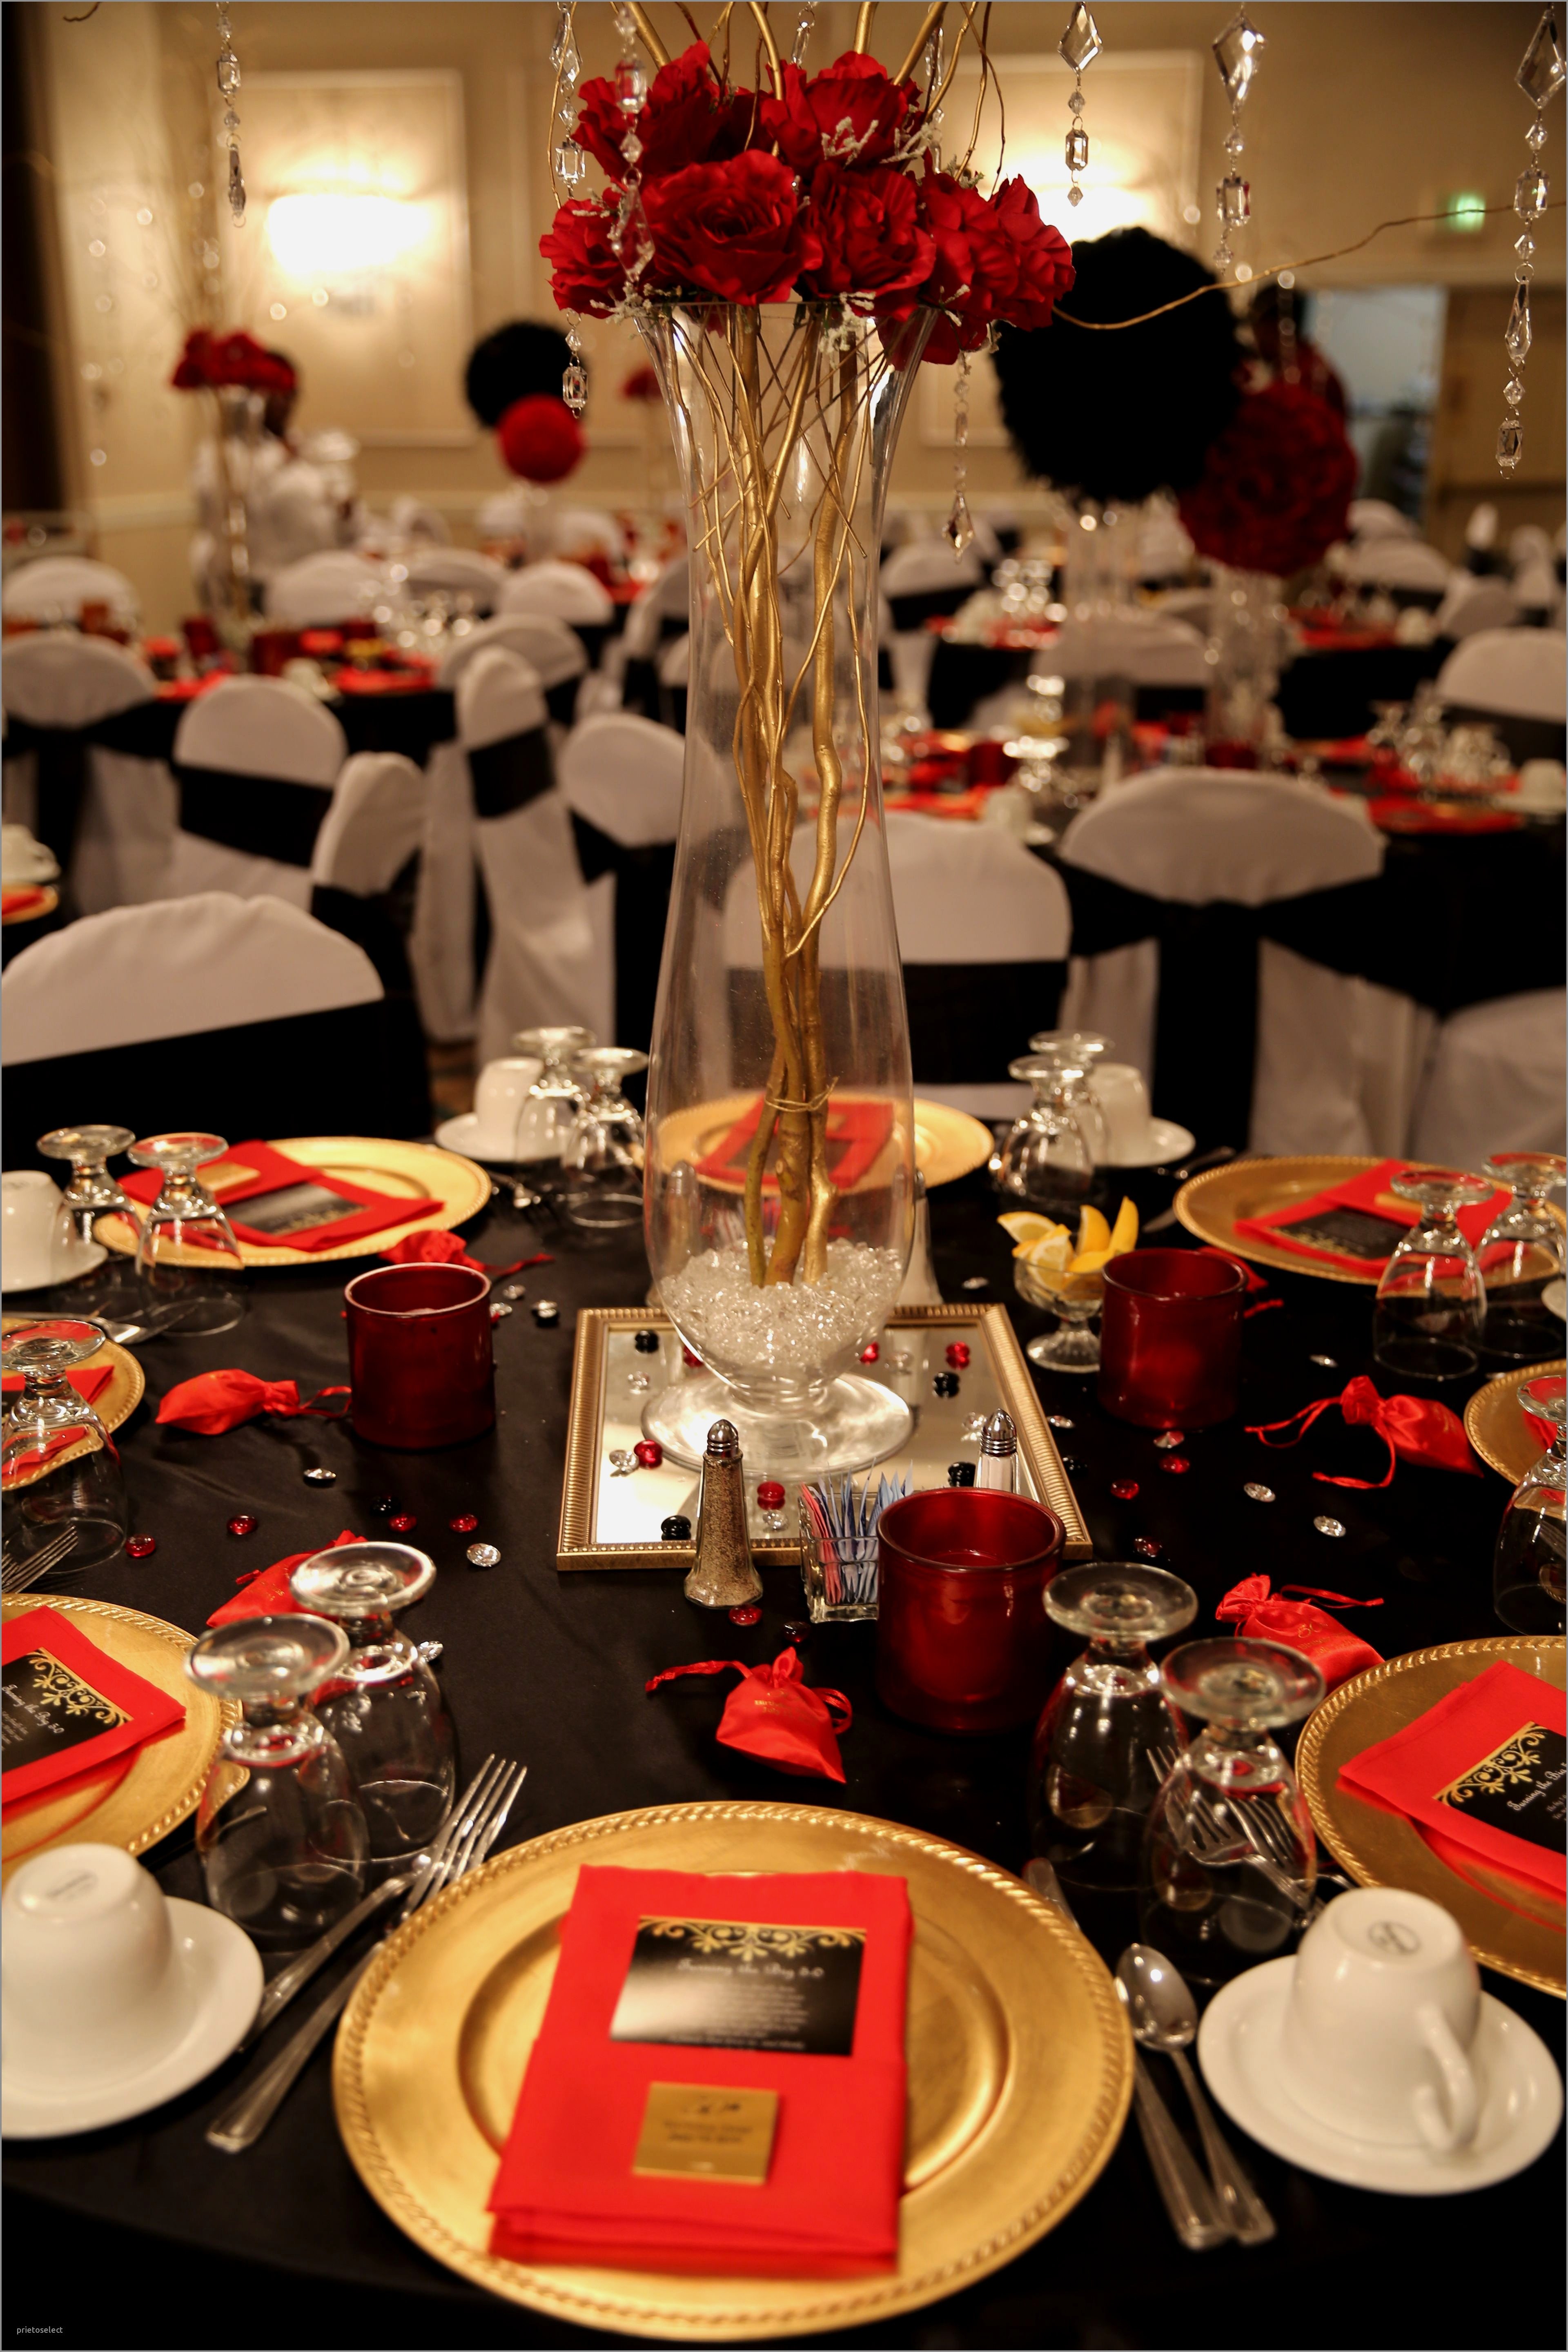 12 Lovable Inexpensive Vase Filler Ideas 2024 free download inexpensive vase filler ideas of 75th birthday table decorations awesome ac2a2ec286a 15 cheap and easy diy within 75th birthday table decorations best of red black and gold table decorations